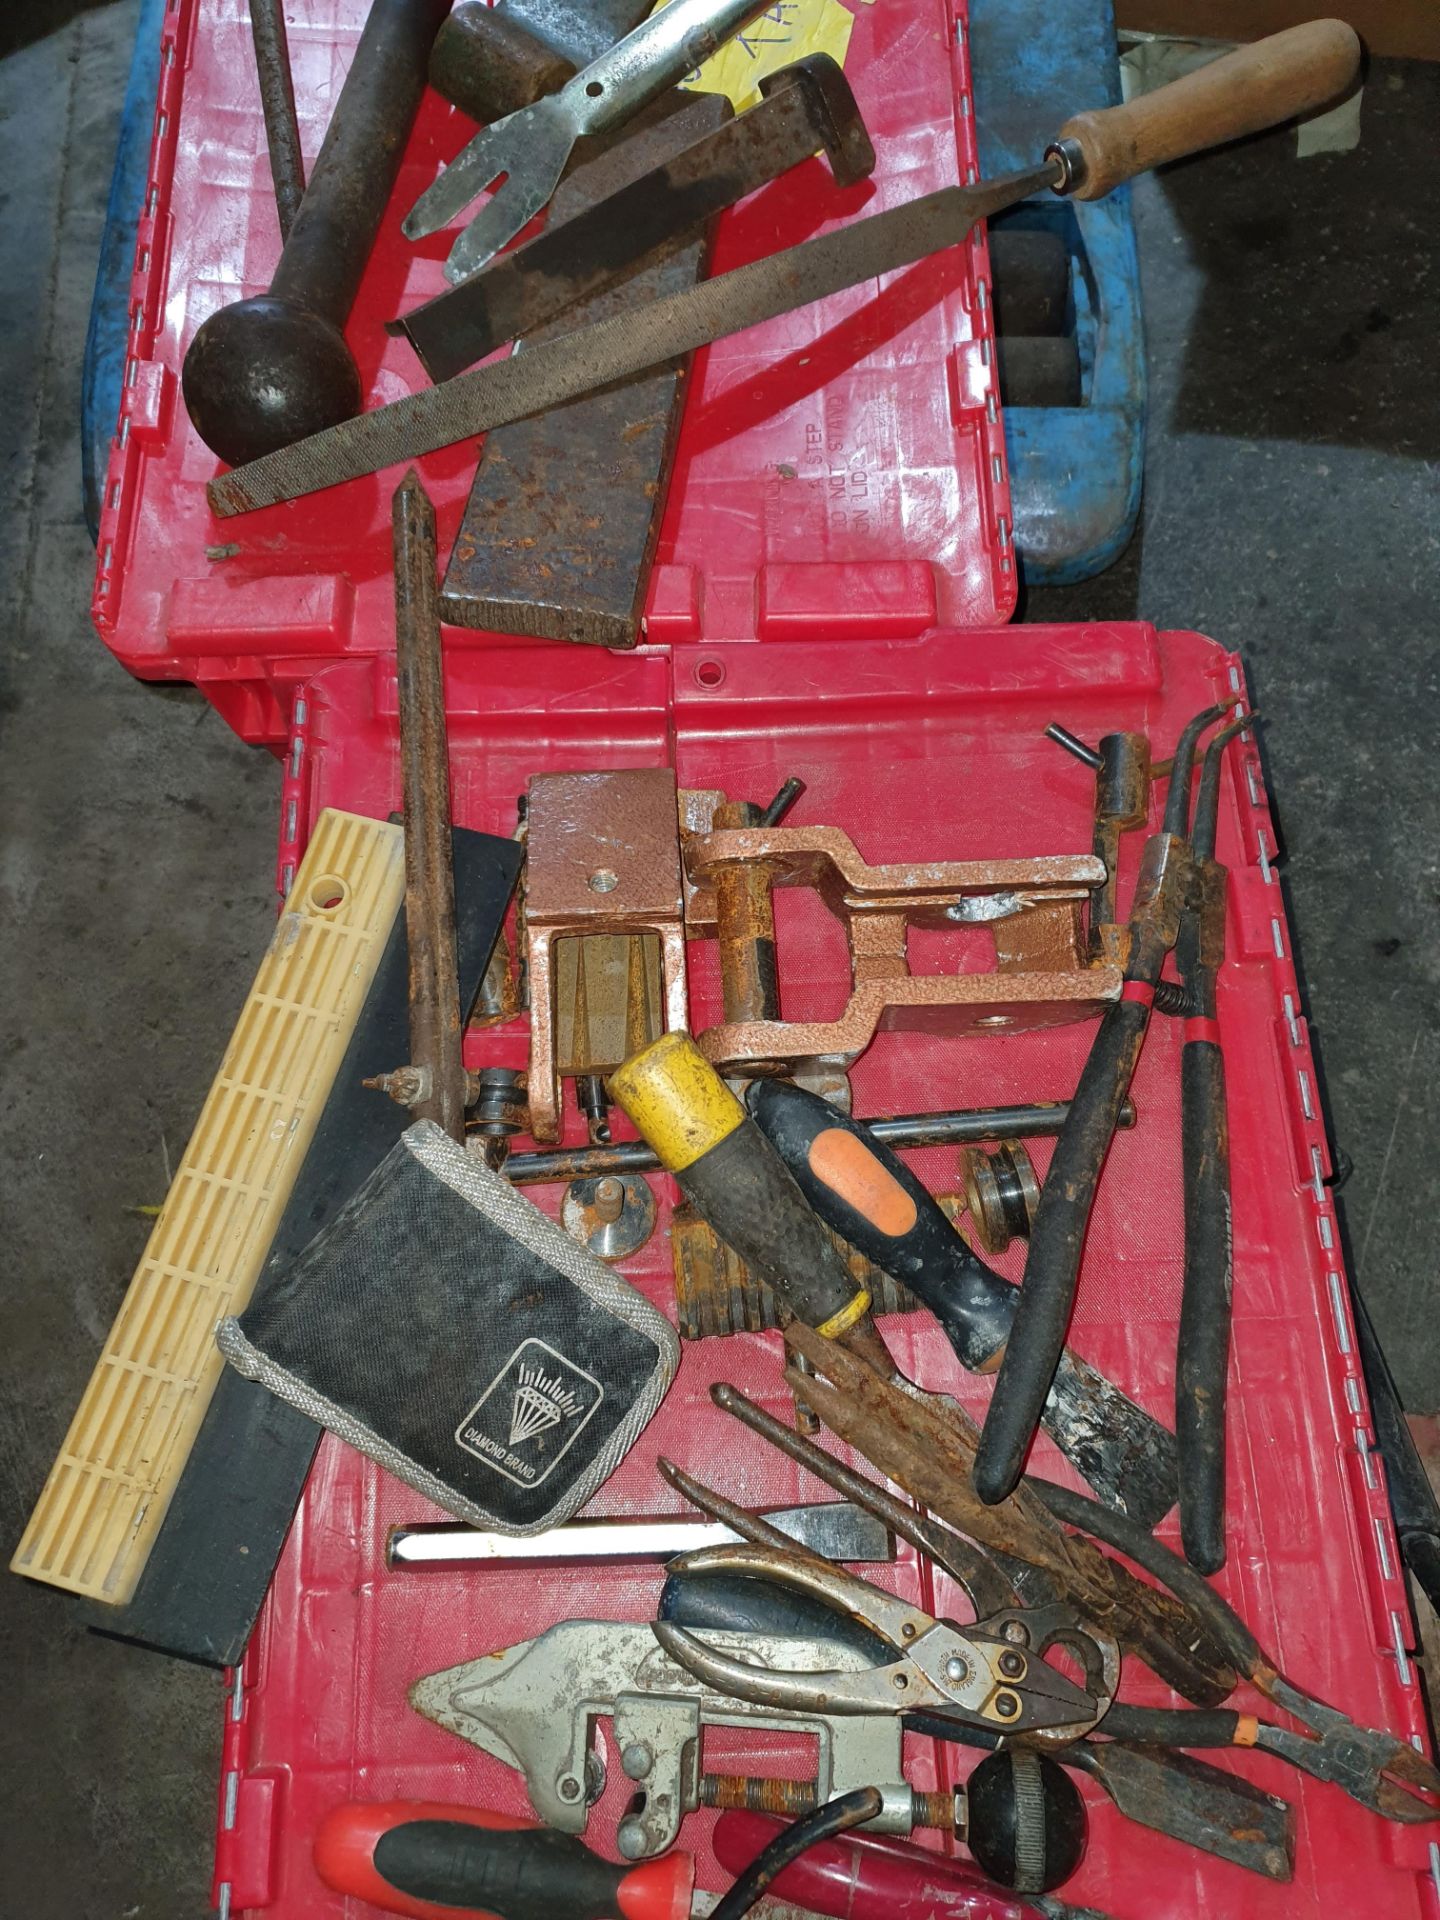 JOB LOT OF TOOLS INCLUDING THE CONTAINER - Image 3 of 3